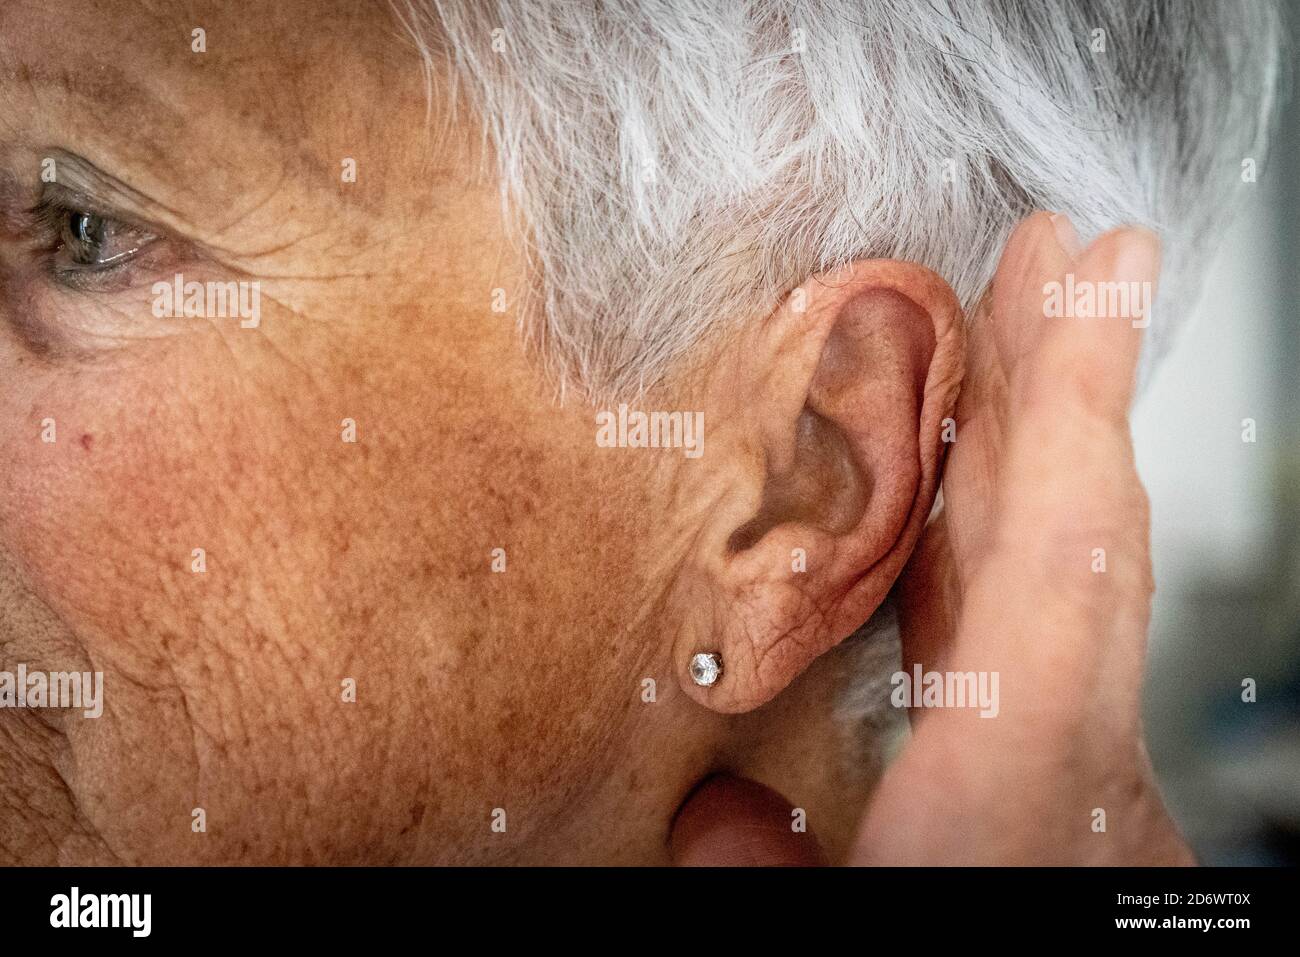 Woman touching her head and ear with earache. Stock Photo